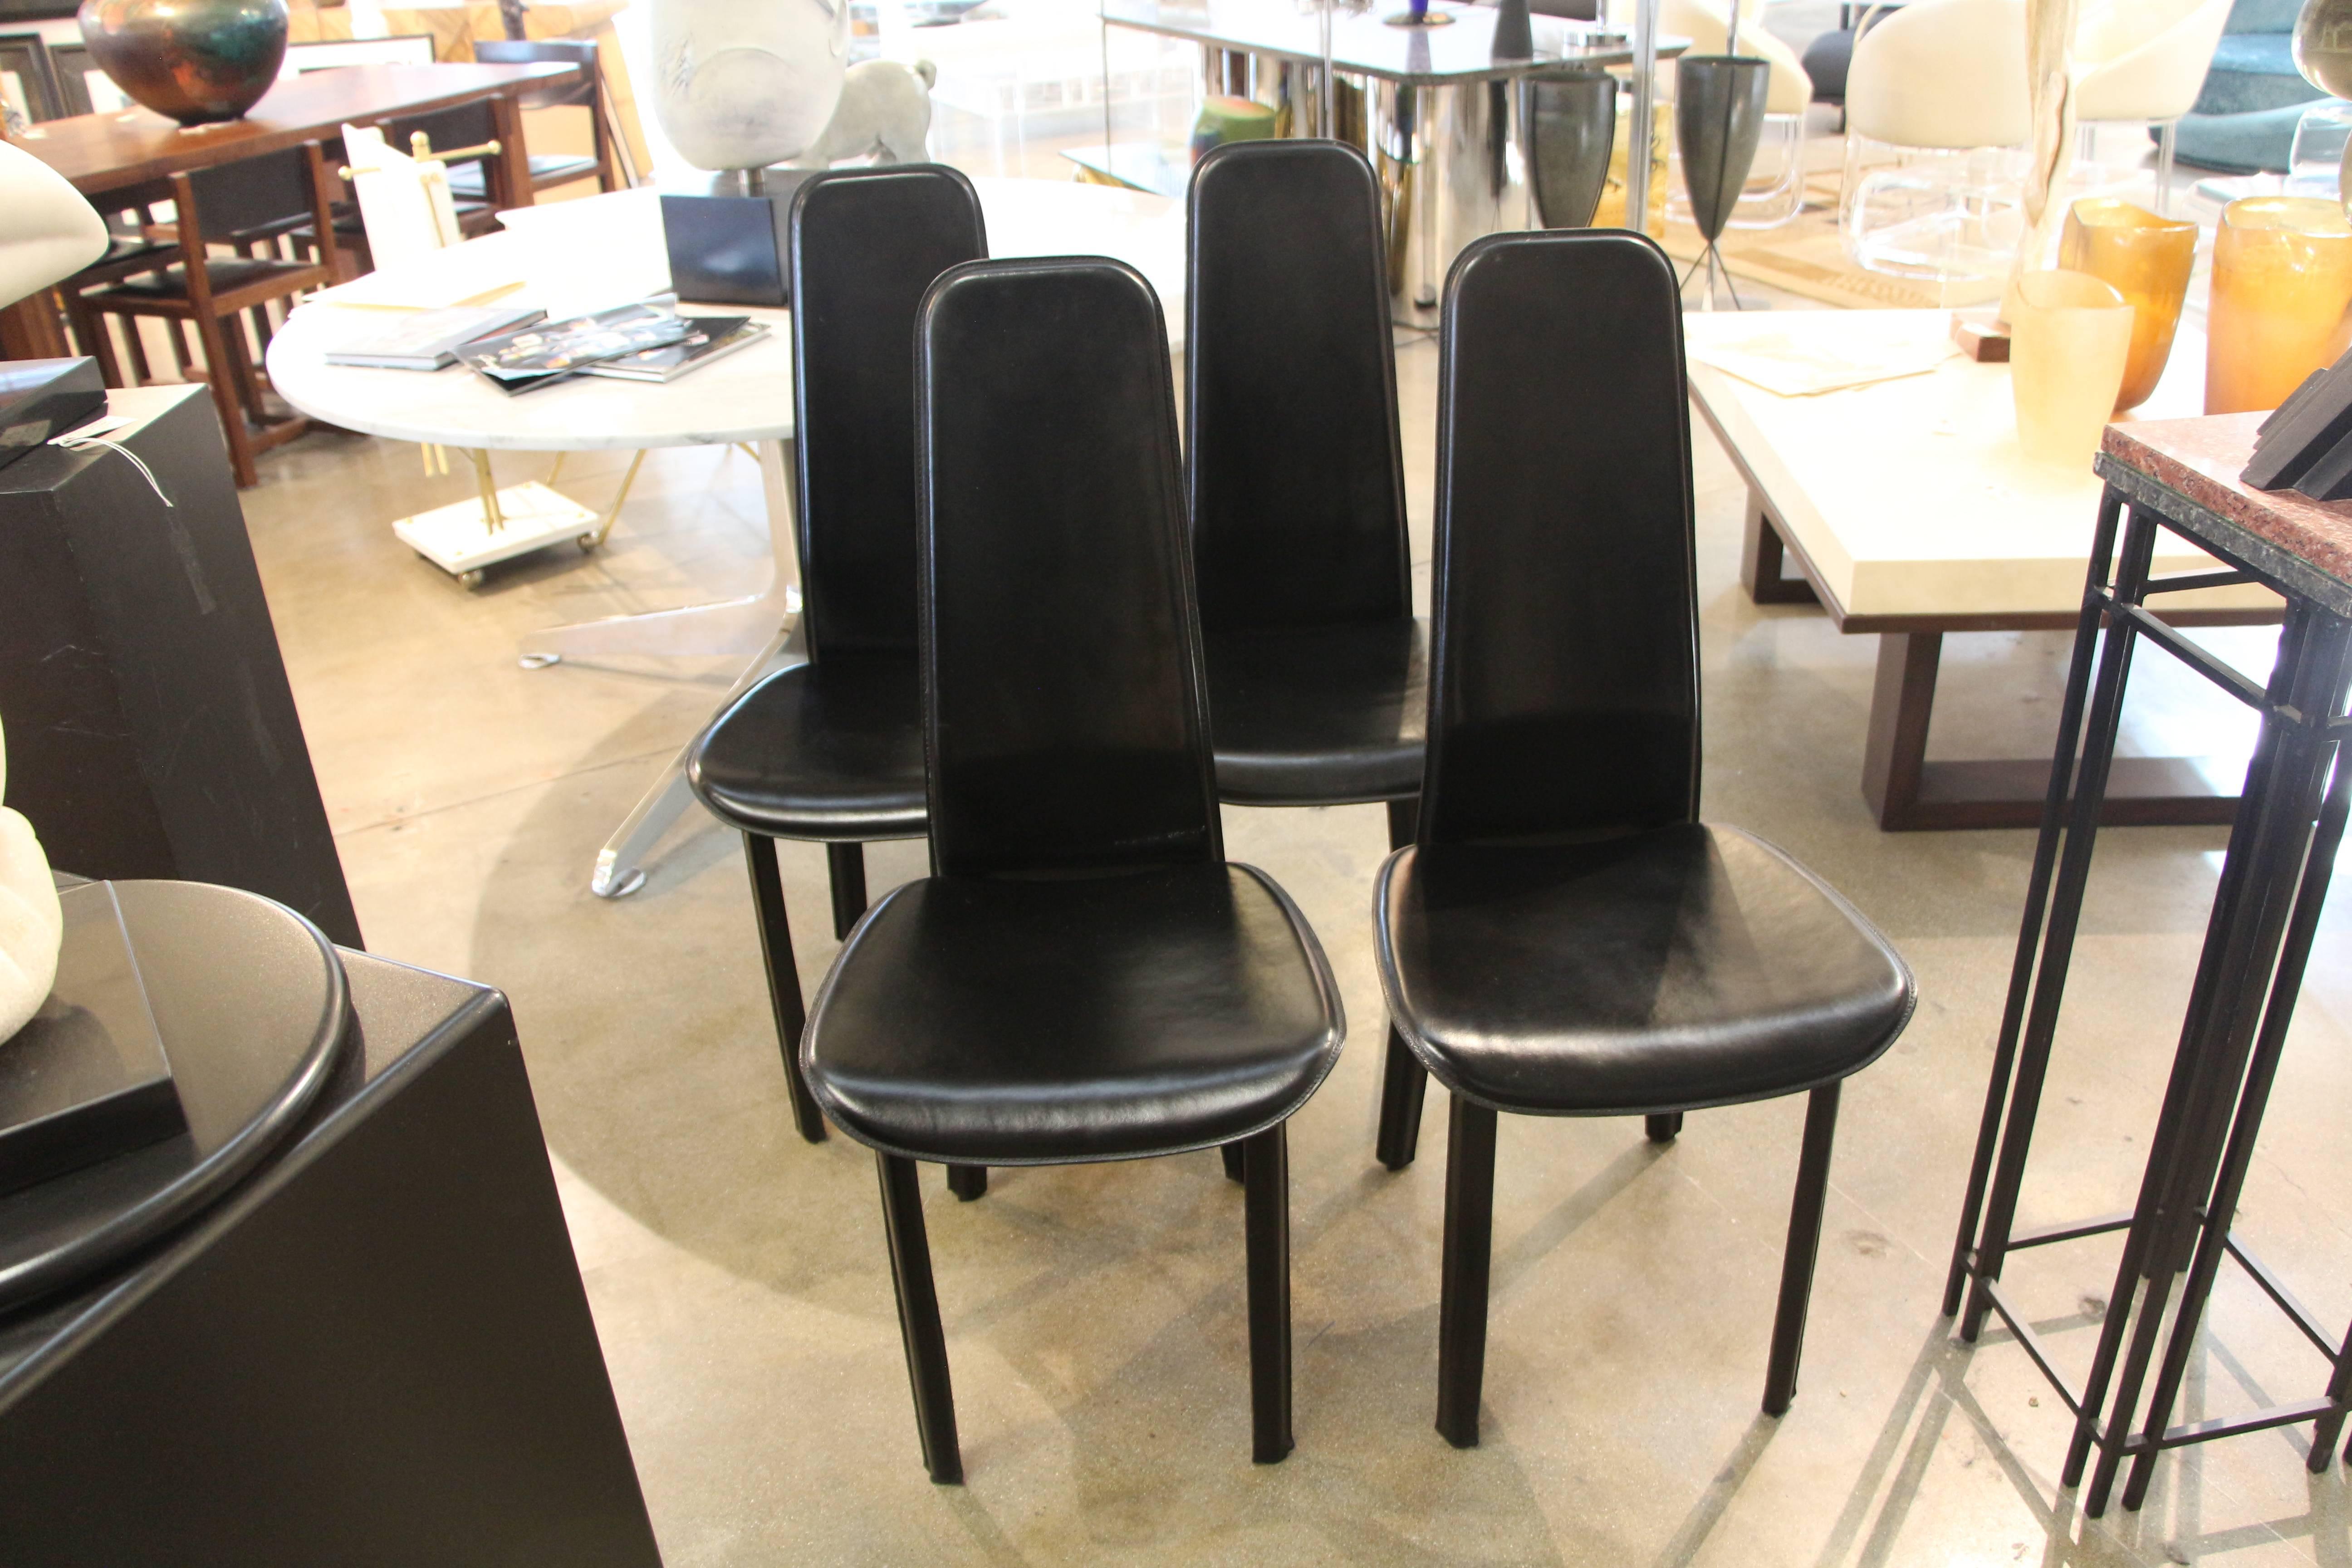 A set of four Cidue Italian black leather chairs. There are in good used condition, with age appropriate wear. There are marks nicks scratches and one chair has a small white paint spot, pictured.